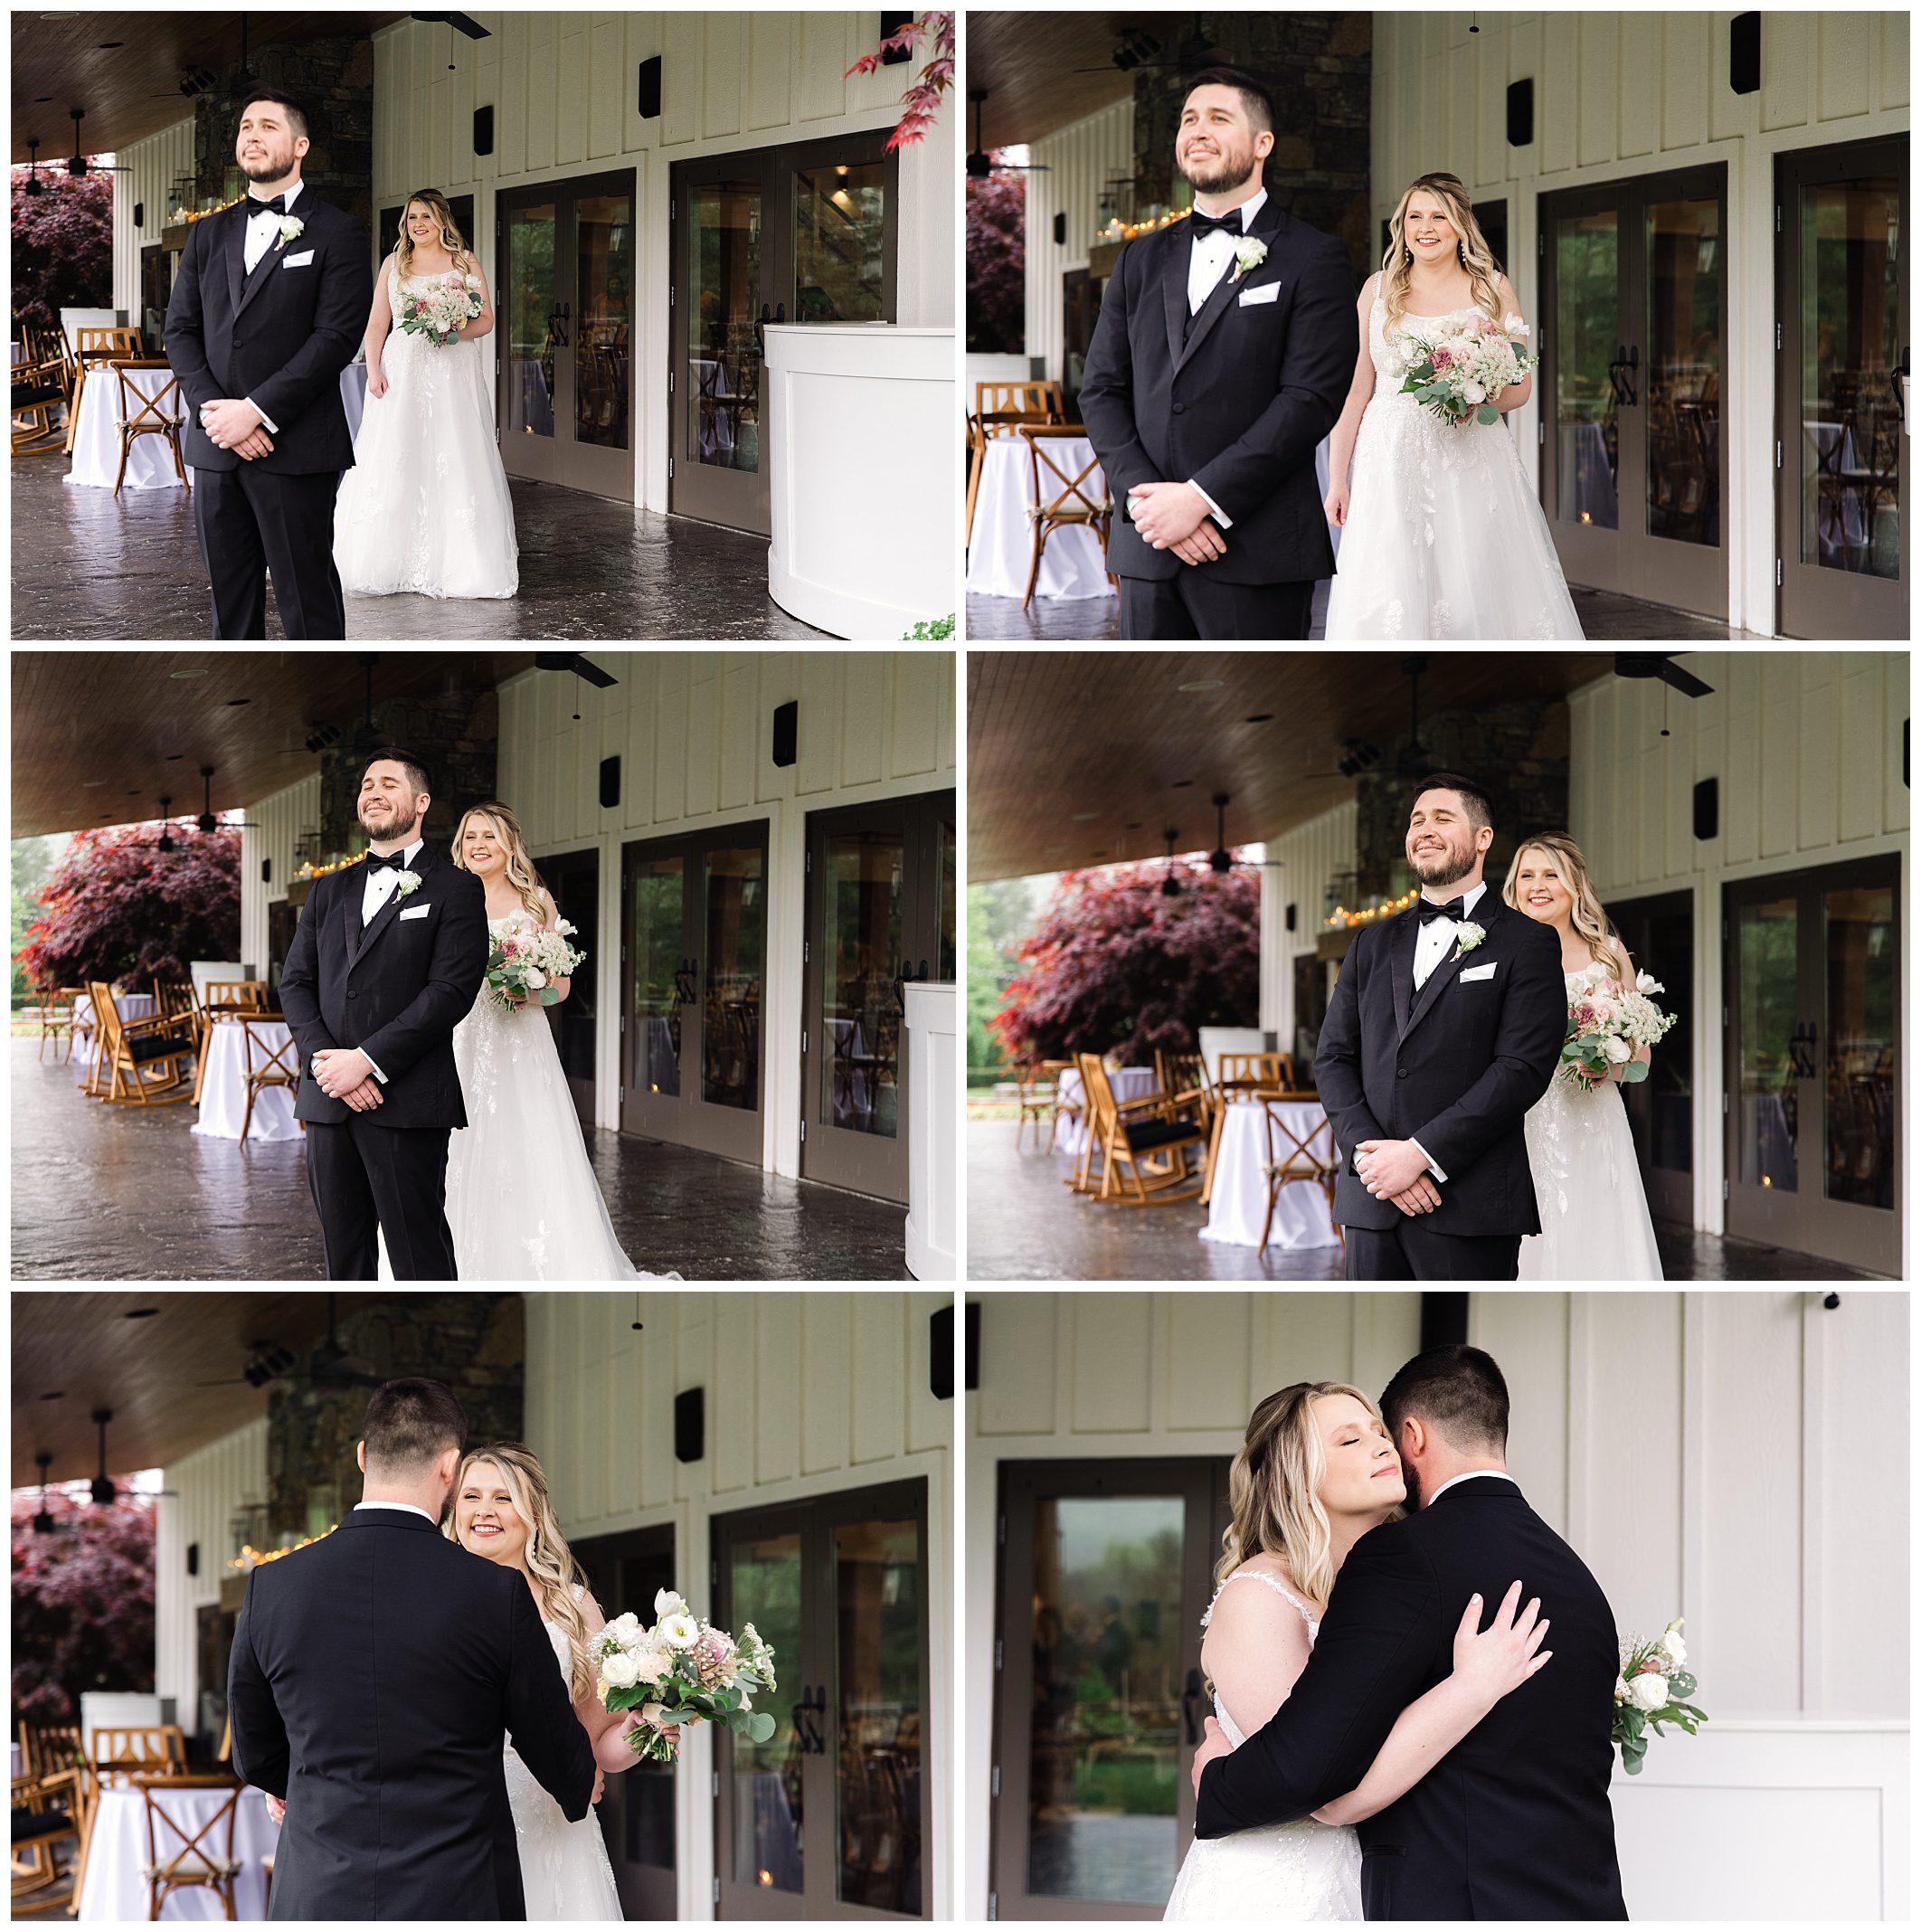 A collage of six mountain wedding photos showing a bride and groom posing together in various affectionate positions outside a venue at Chestnut Ridge, with large windows and pendant lights.